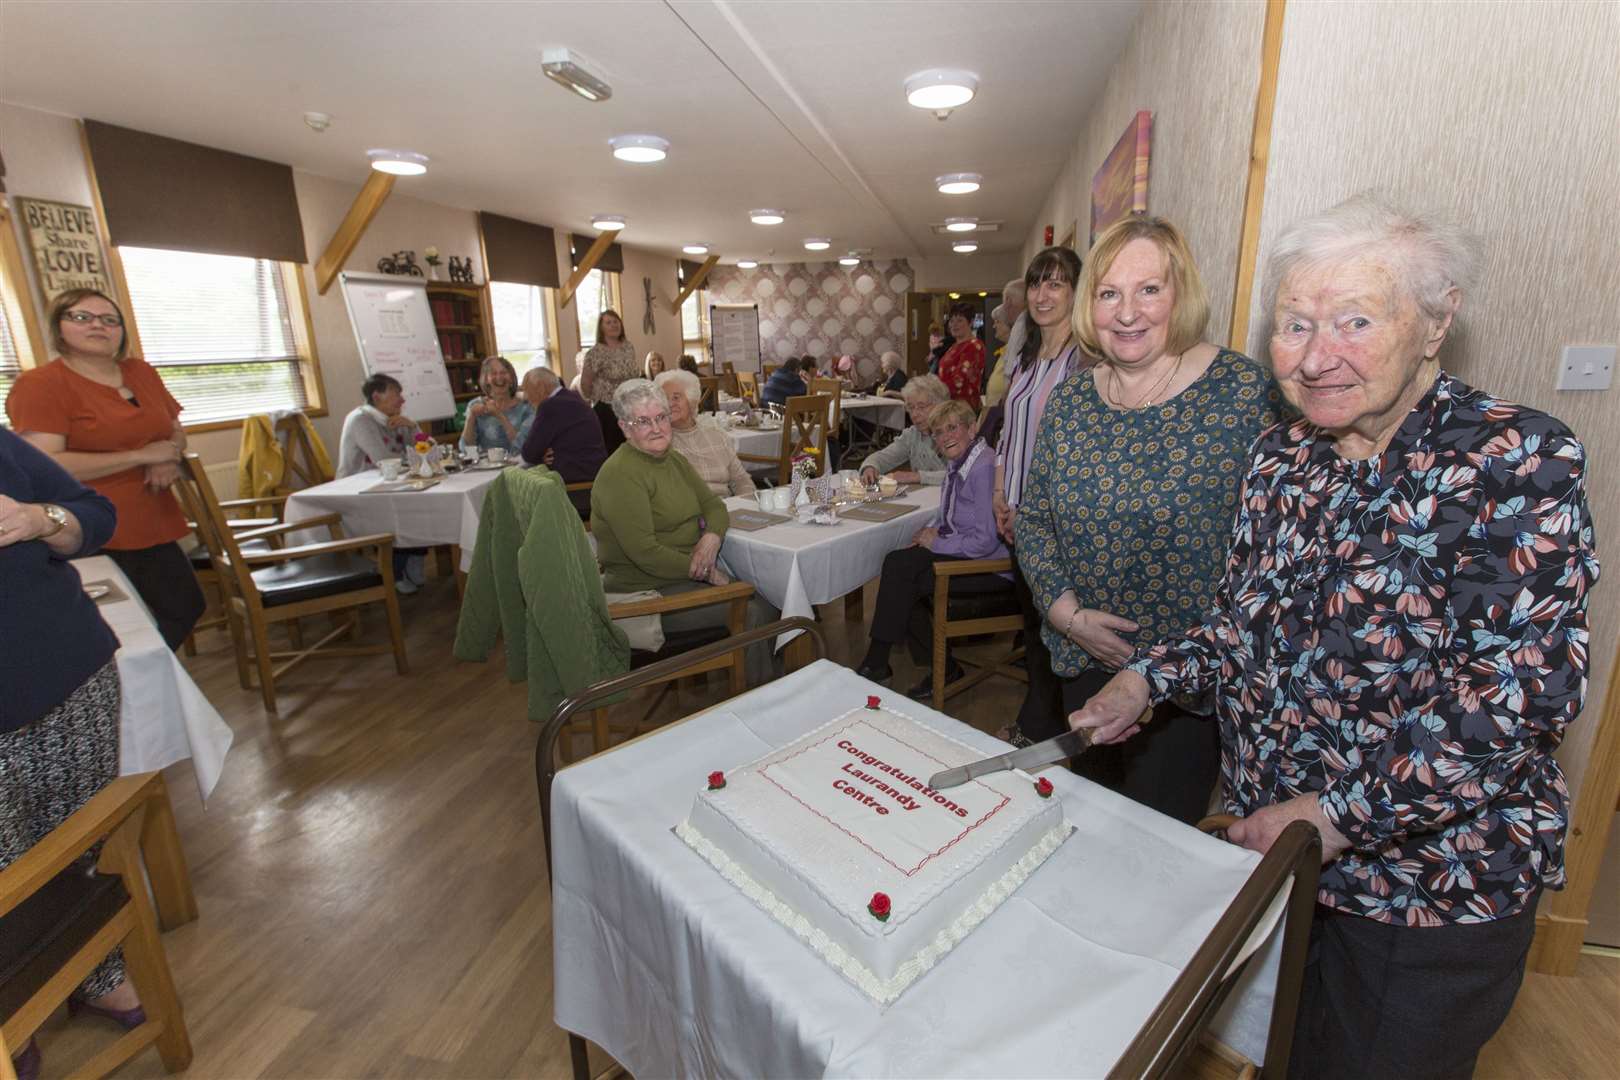 Dorrie Barnes (98), the centre's oldest service user, cuts a cake to mark the occasion, watched by centre manager Margaret Allan and some of the guests, staff and attendees. Picture: Robert MacDonald / Northern Studios